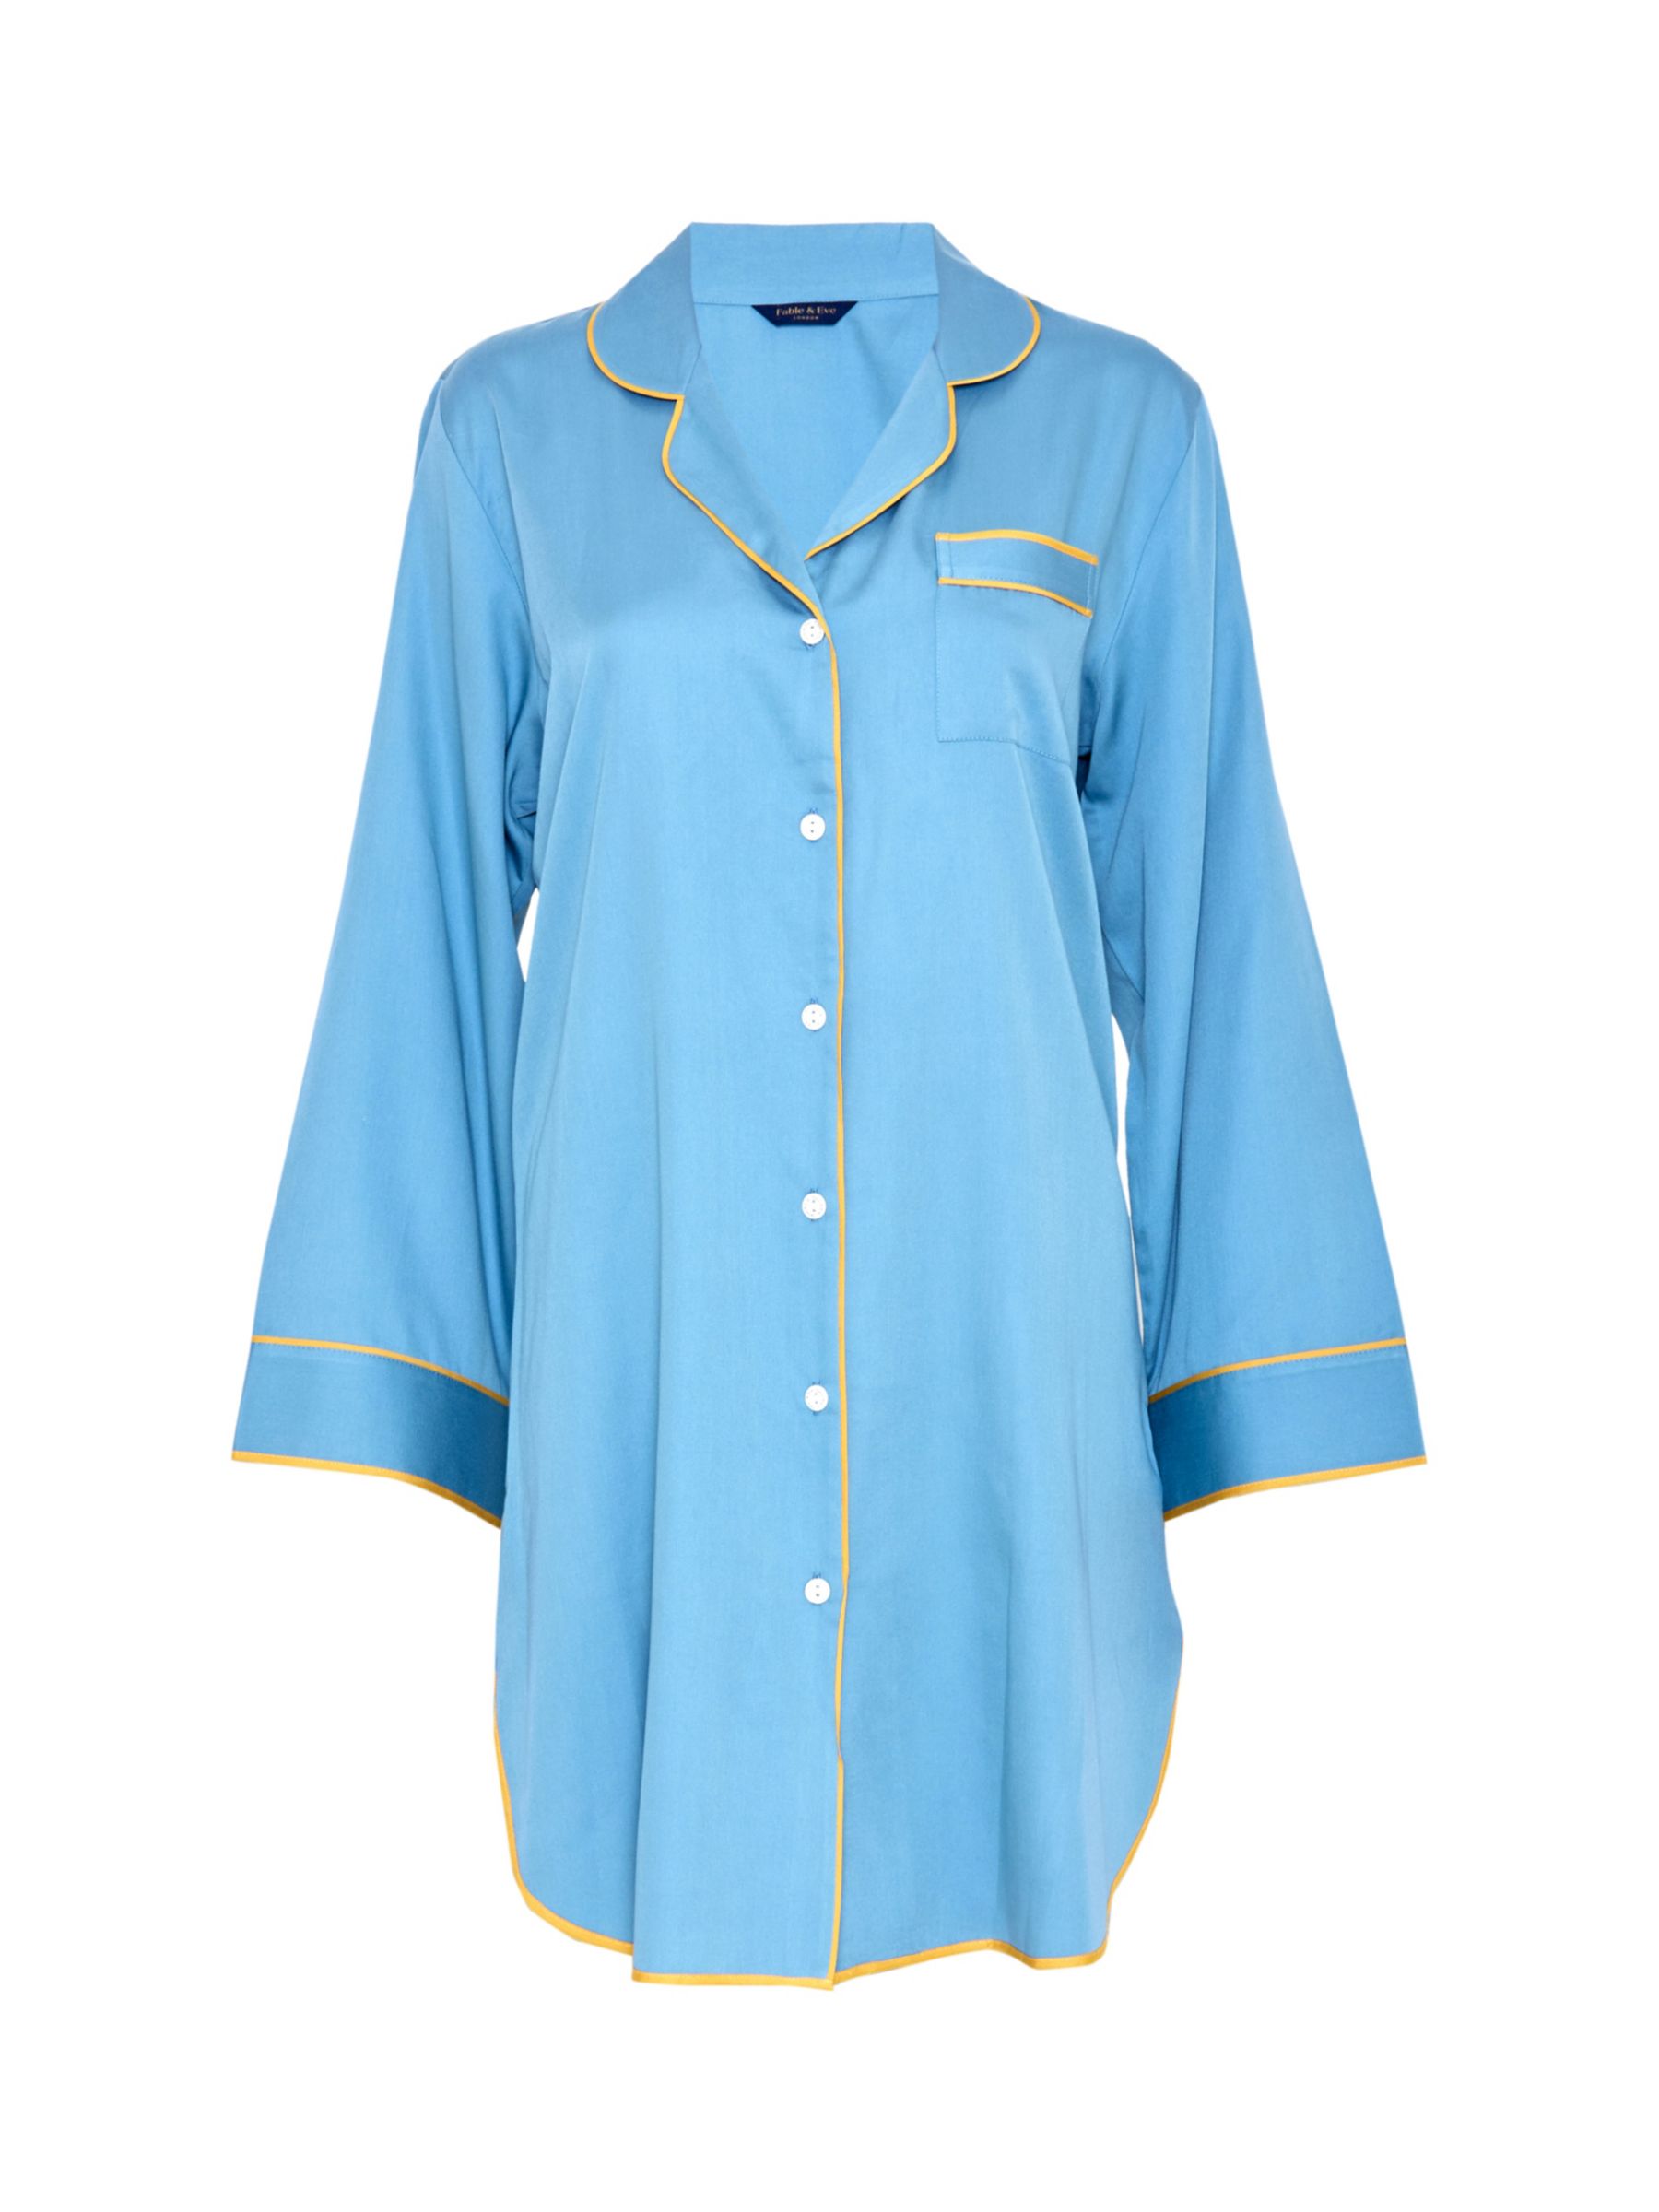 Fable & Eve Greenwich Nightshirt, Cerulean Blue at John Lewis & Partners